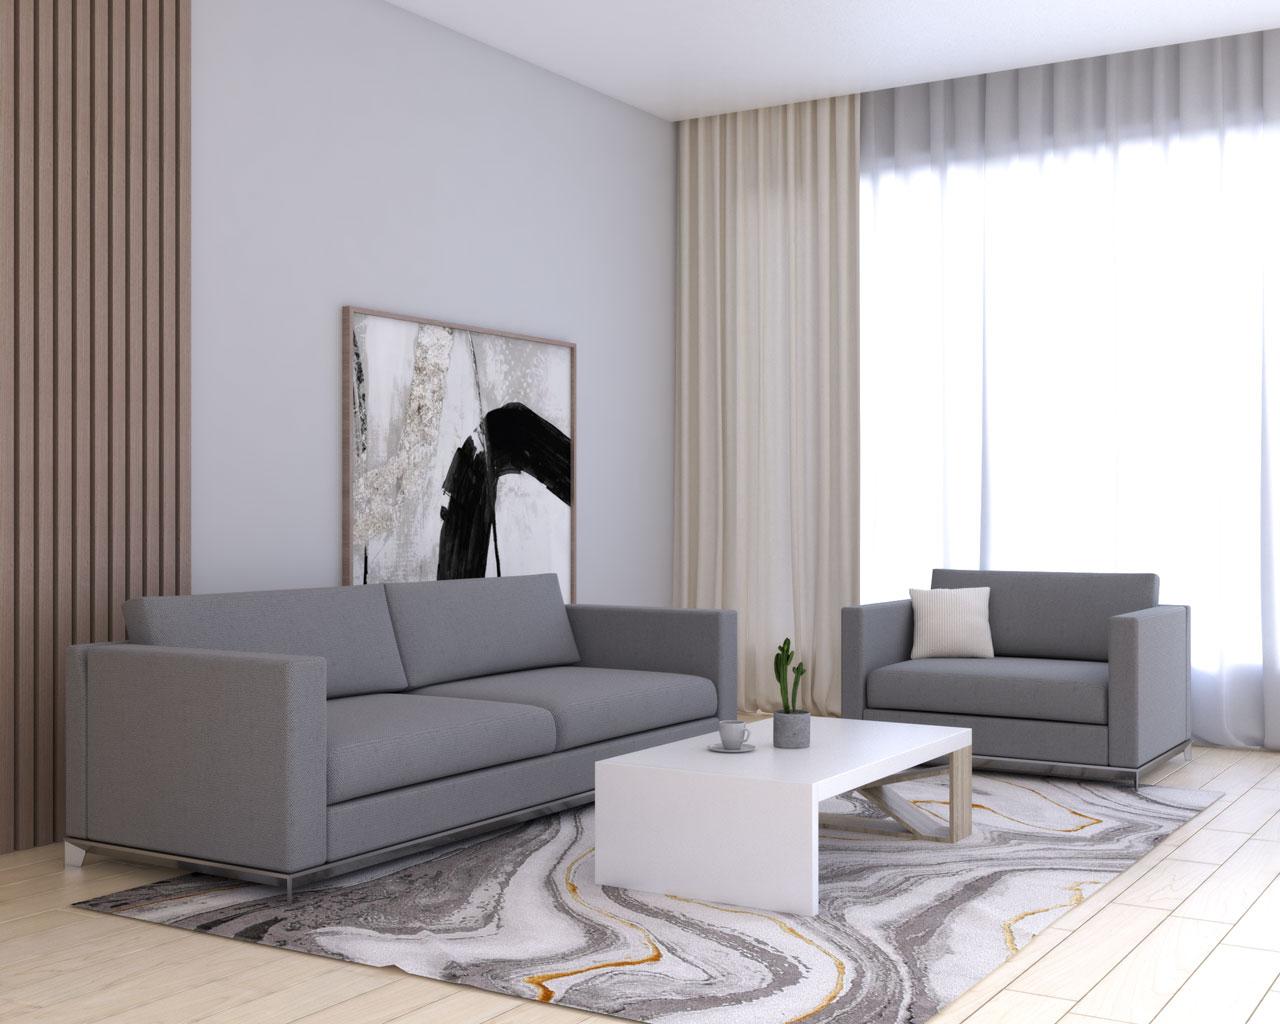 Cream curtains with gray couch